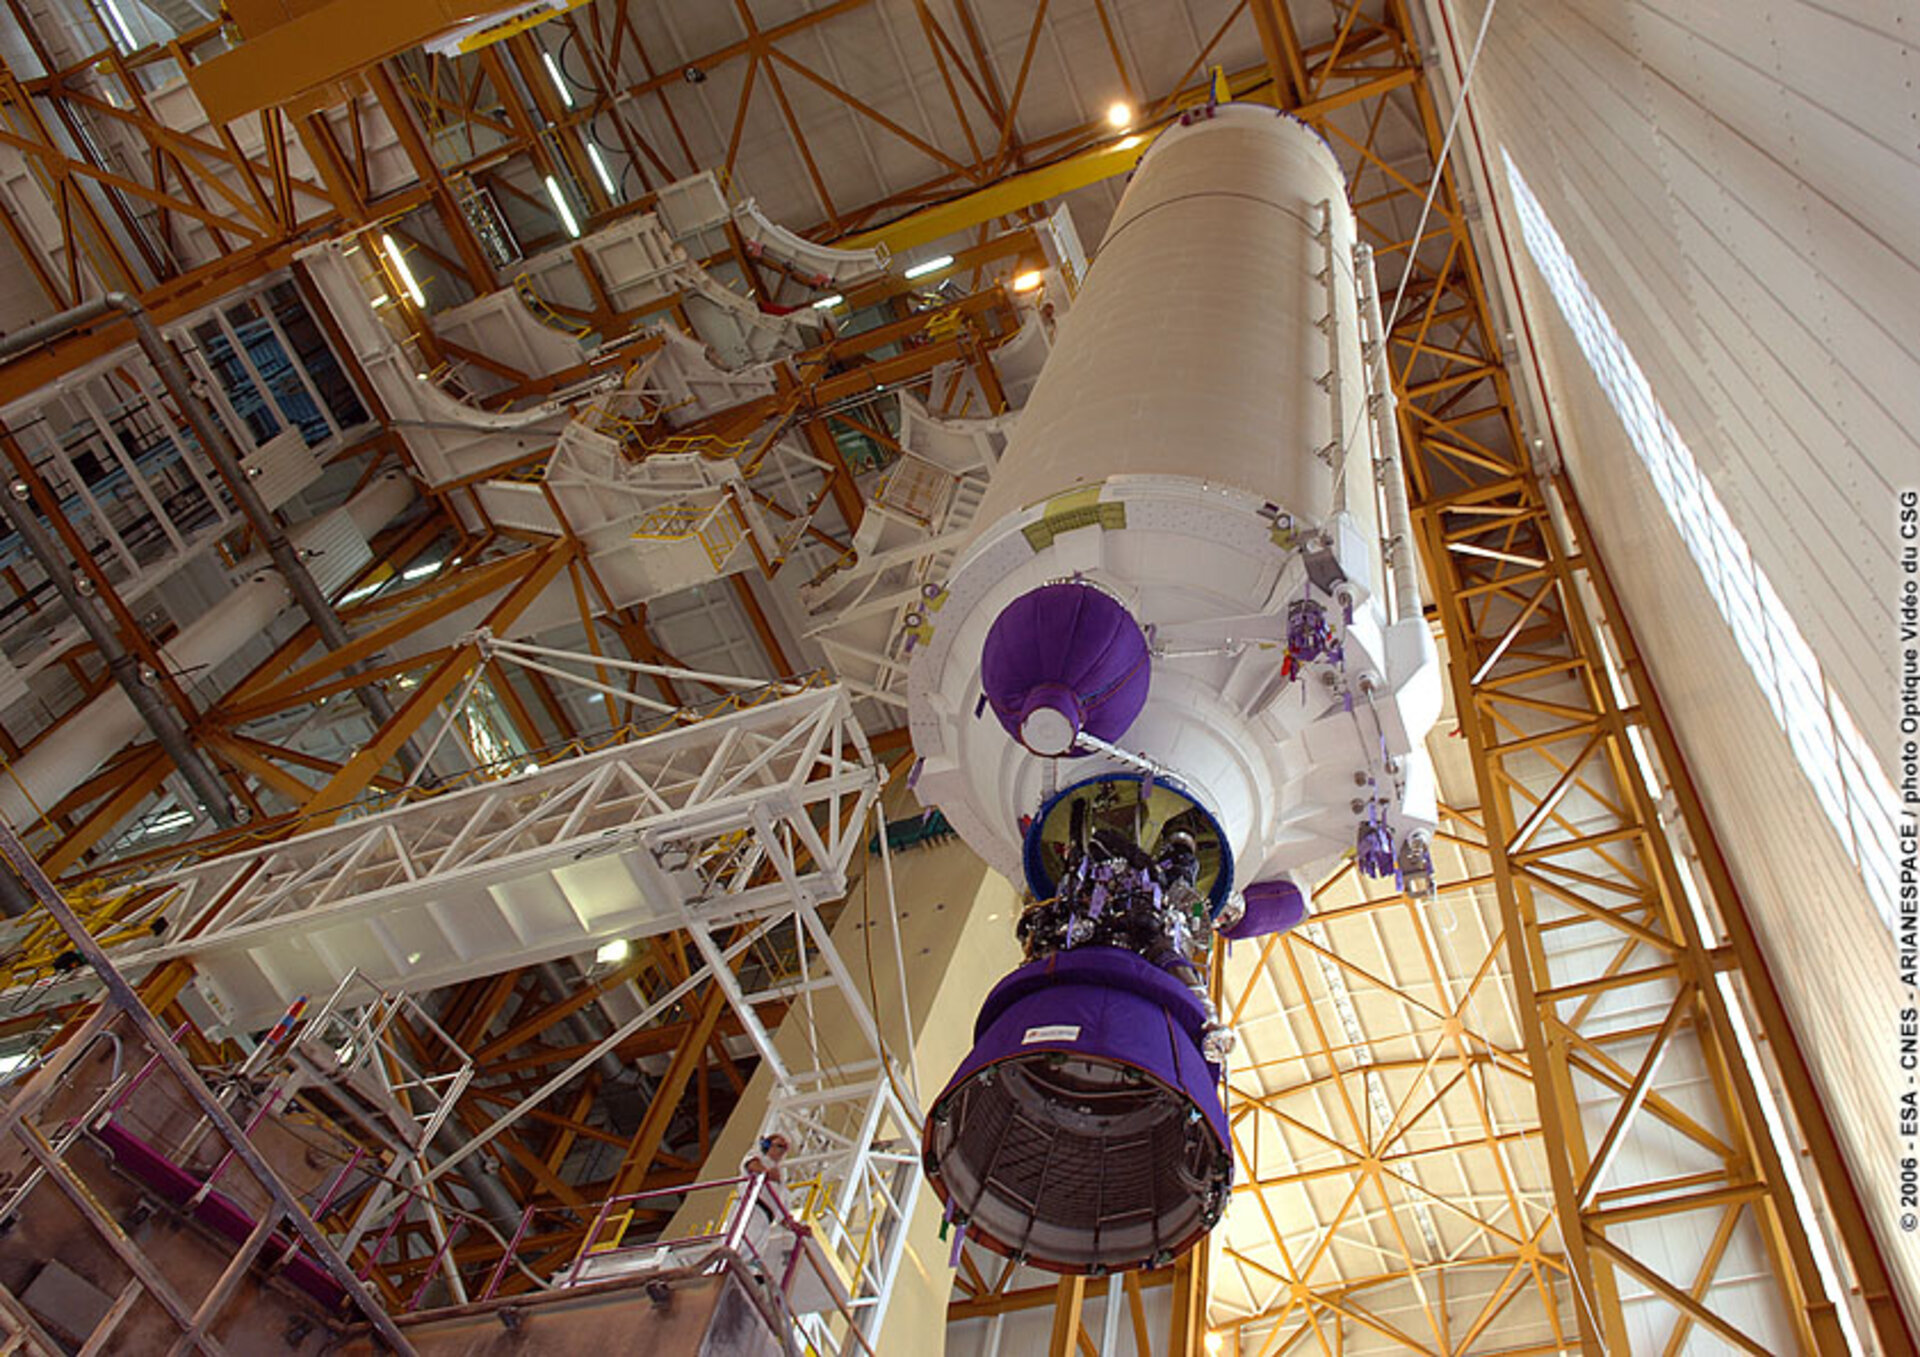 The Core Cryogenic Stage for Ariane 5 is hoisted into vertical position in the Launcher Integration Building